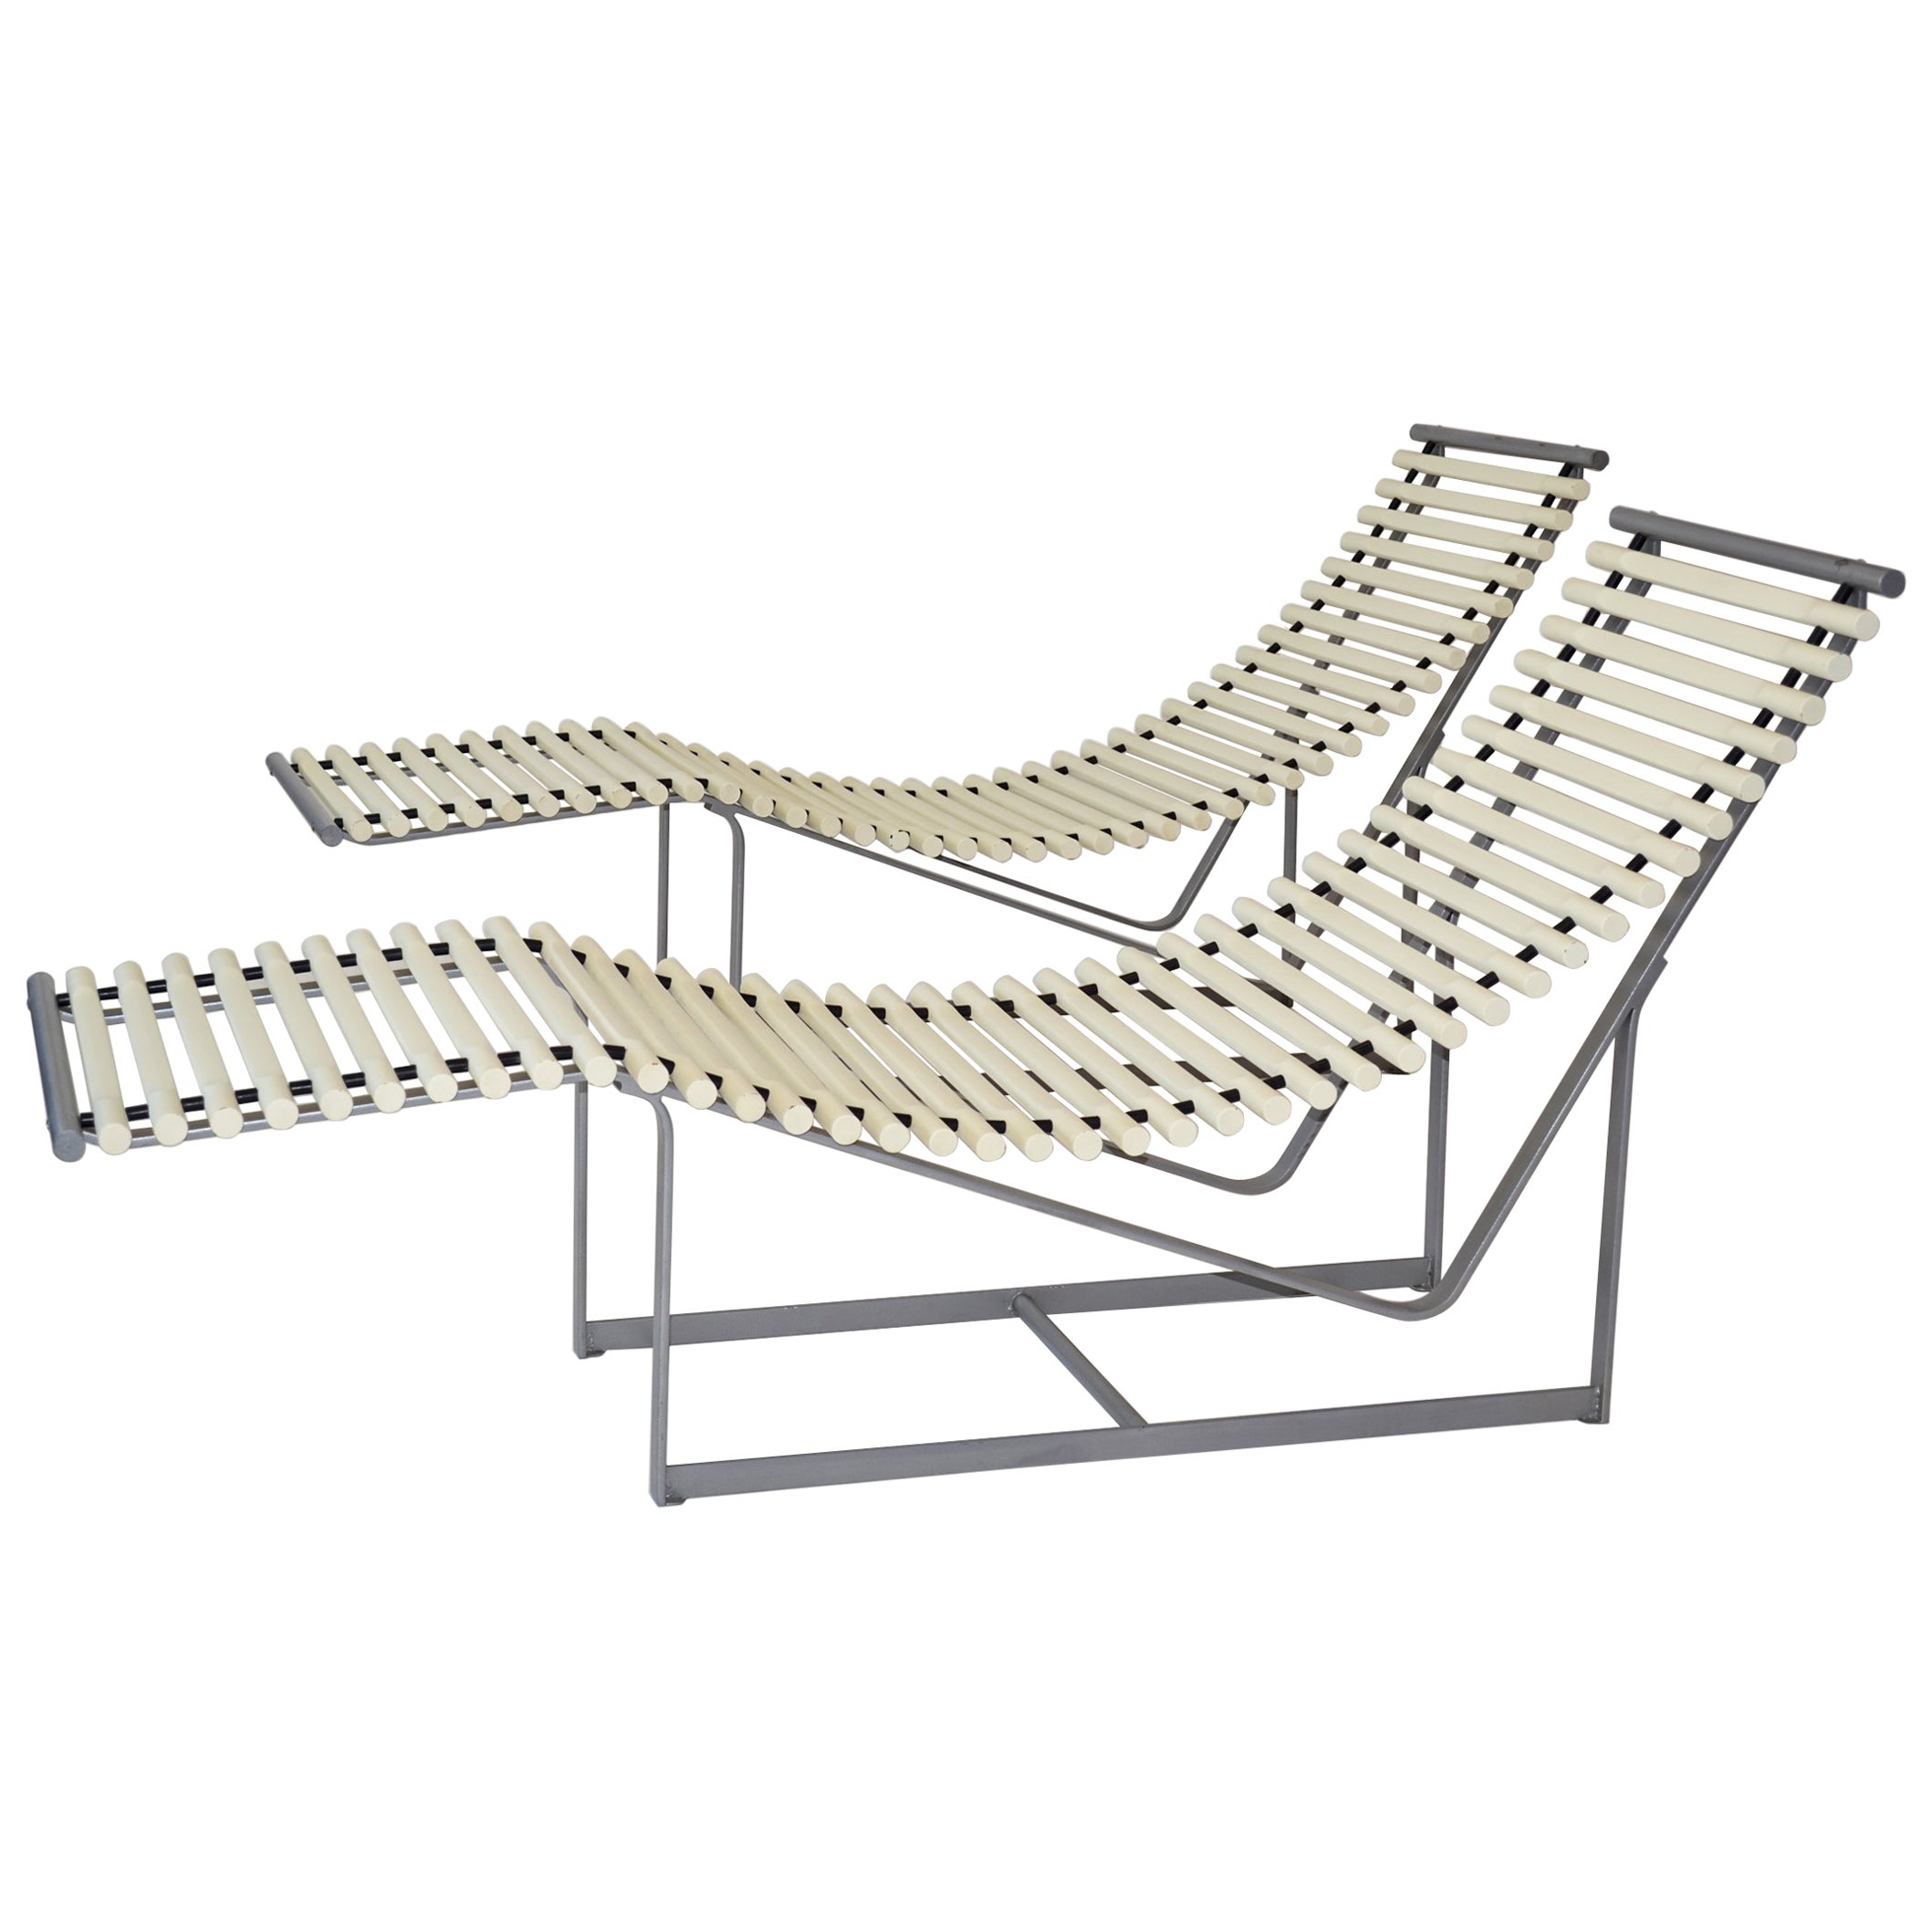 Pair of Peter Strassl Spine Back Lounge Chairs or Chaises, Germany, 1978